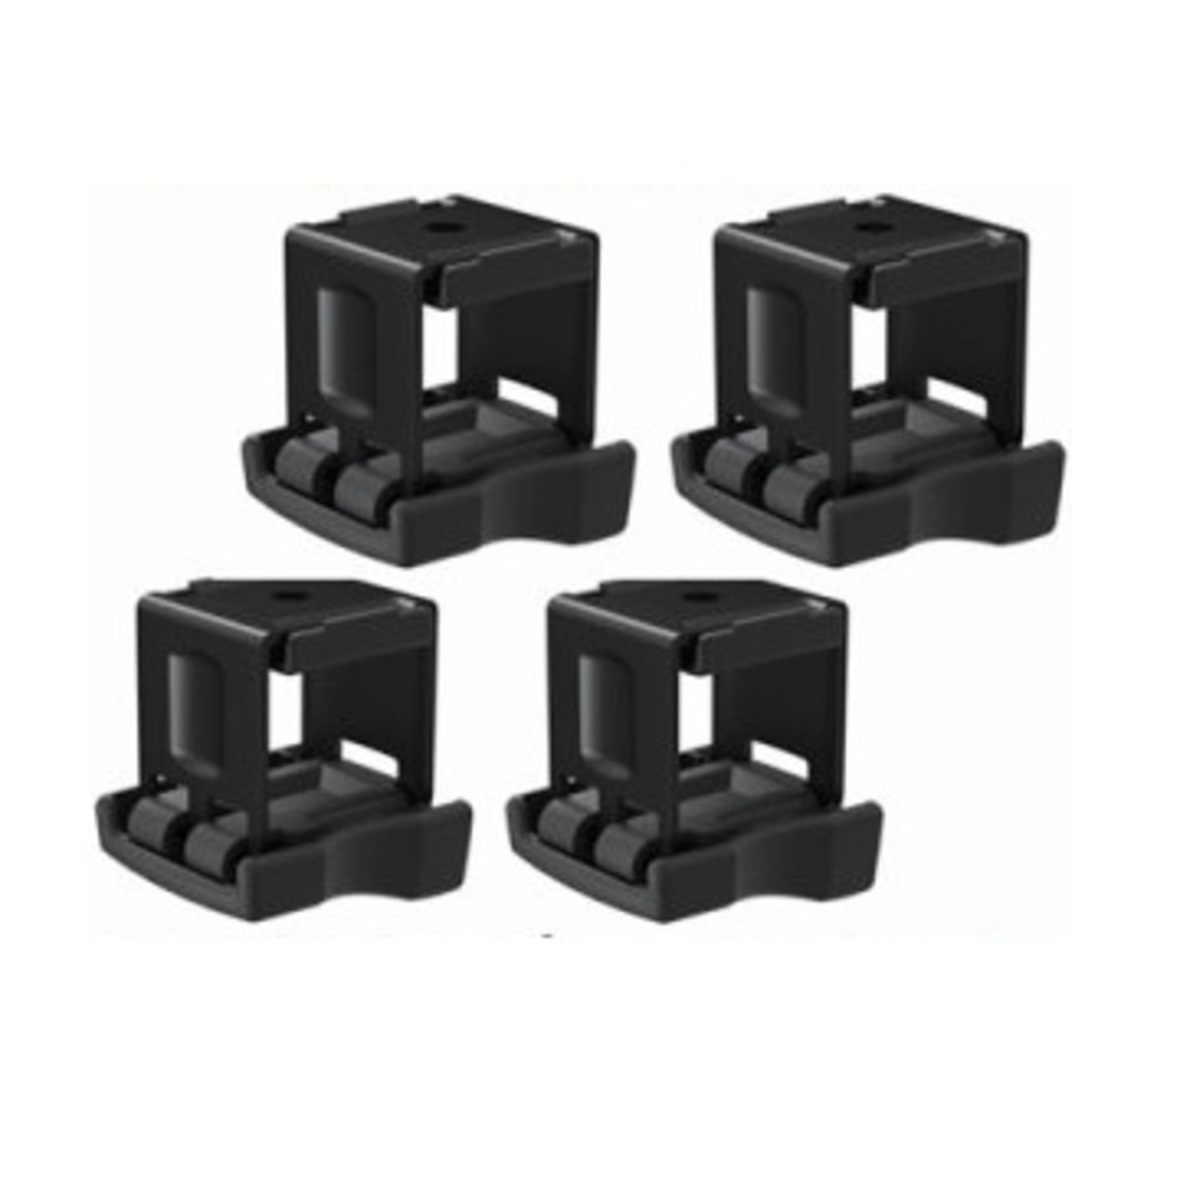 30x24mm Thule 889-6 T-track Adapter for Thule SnowPack Roof Bar Rack 